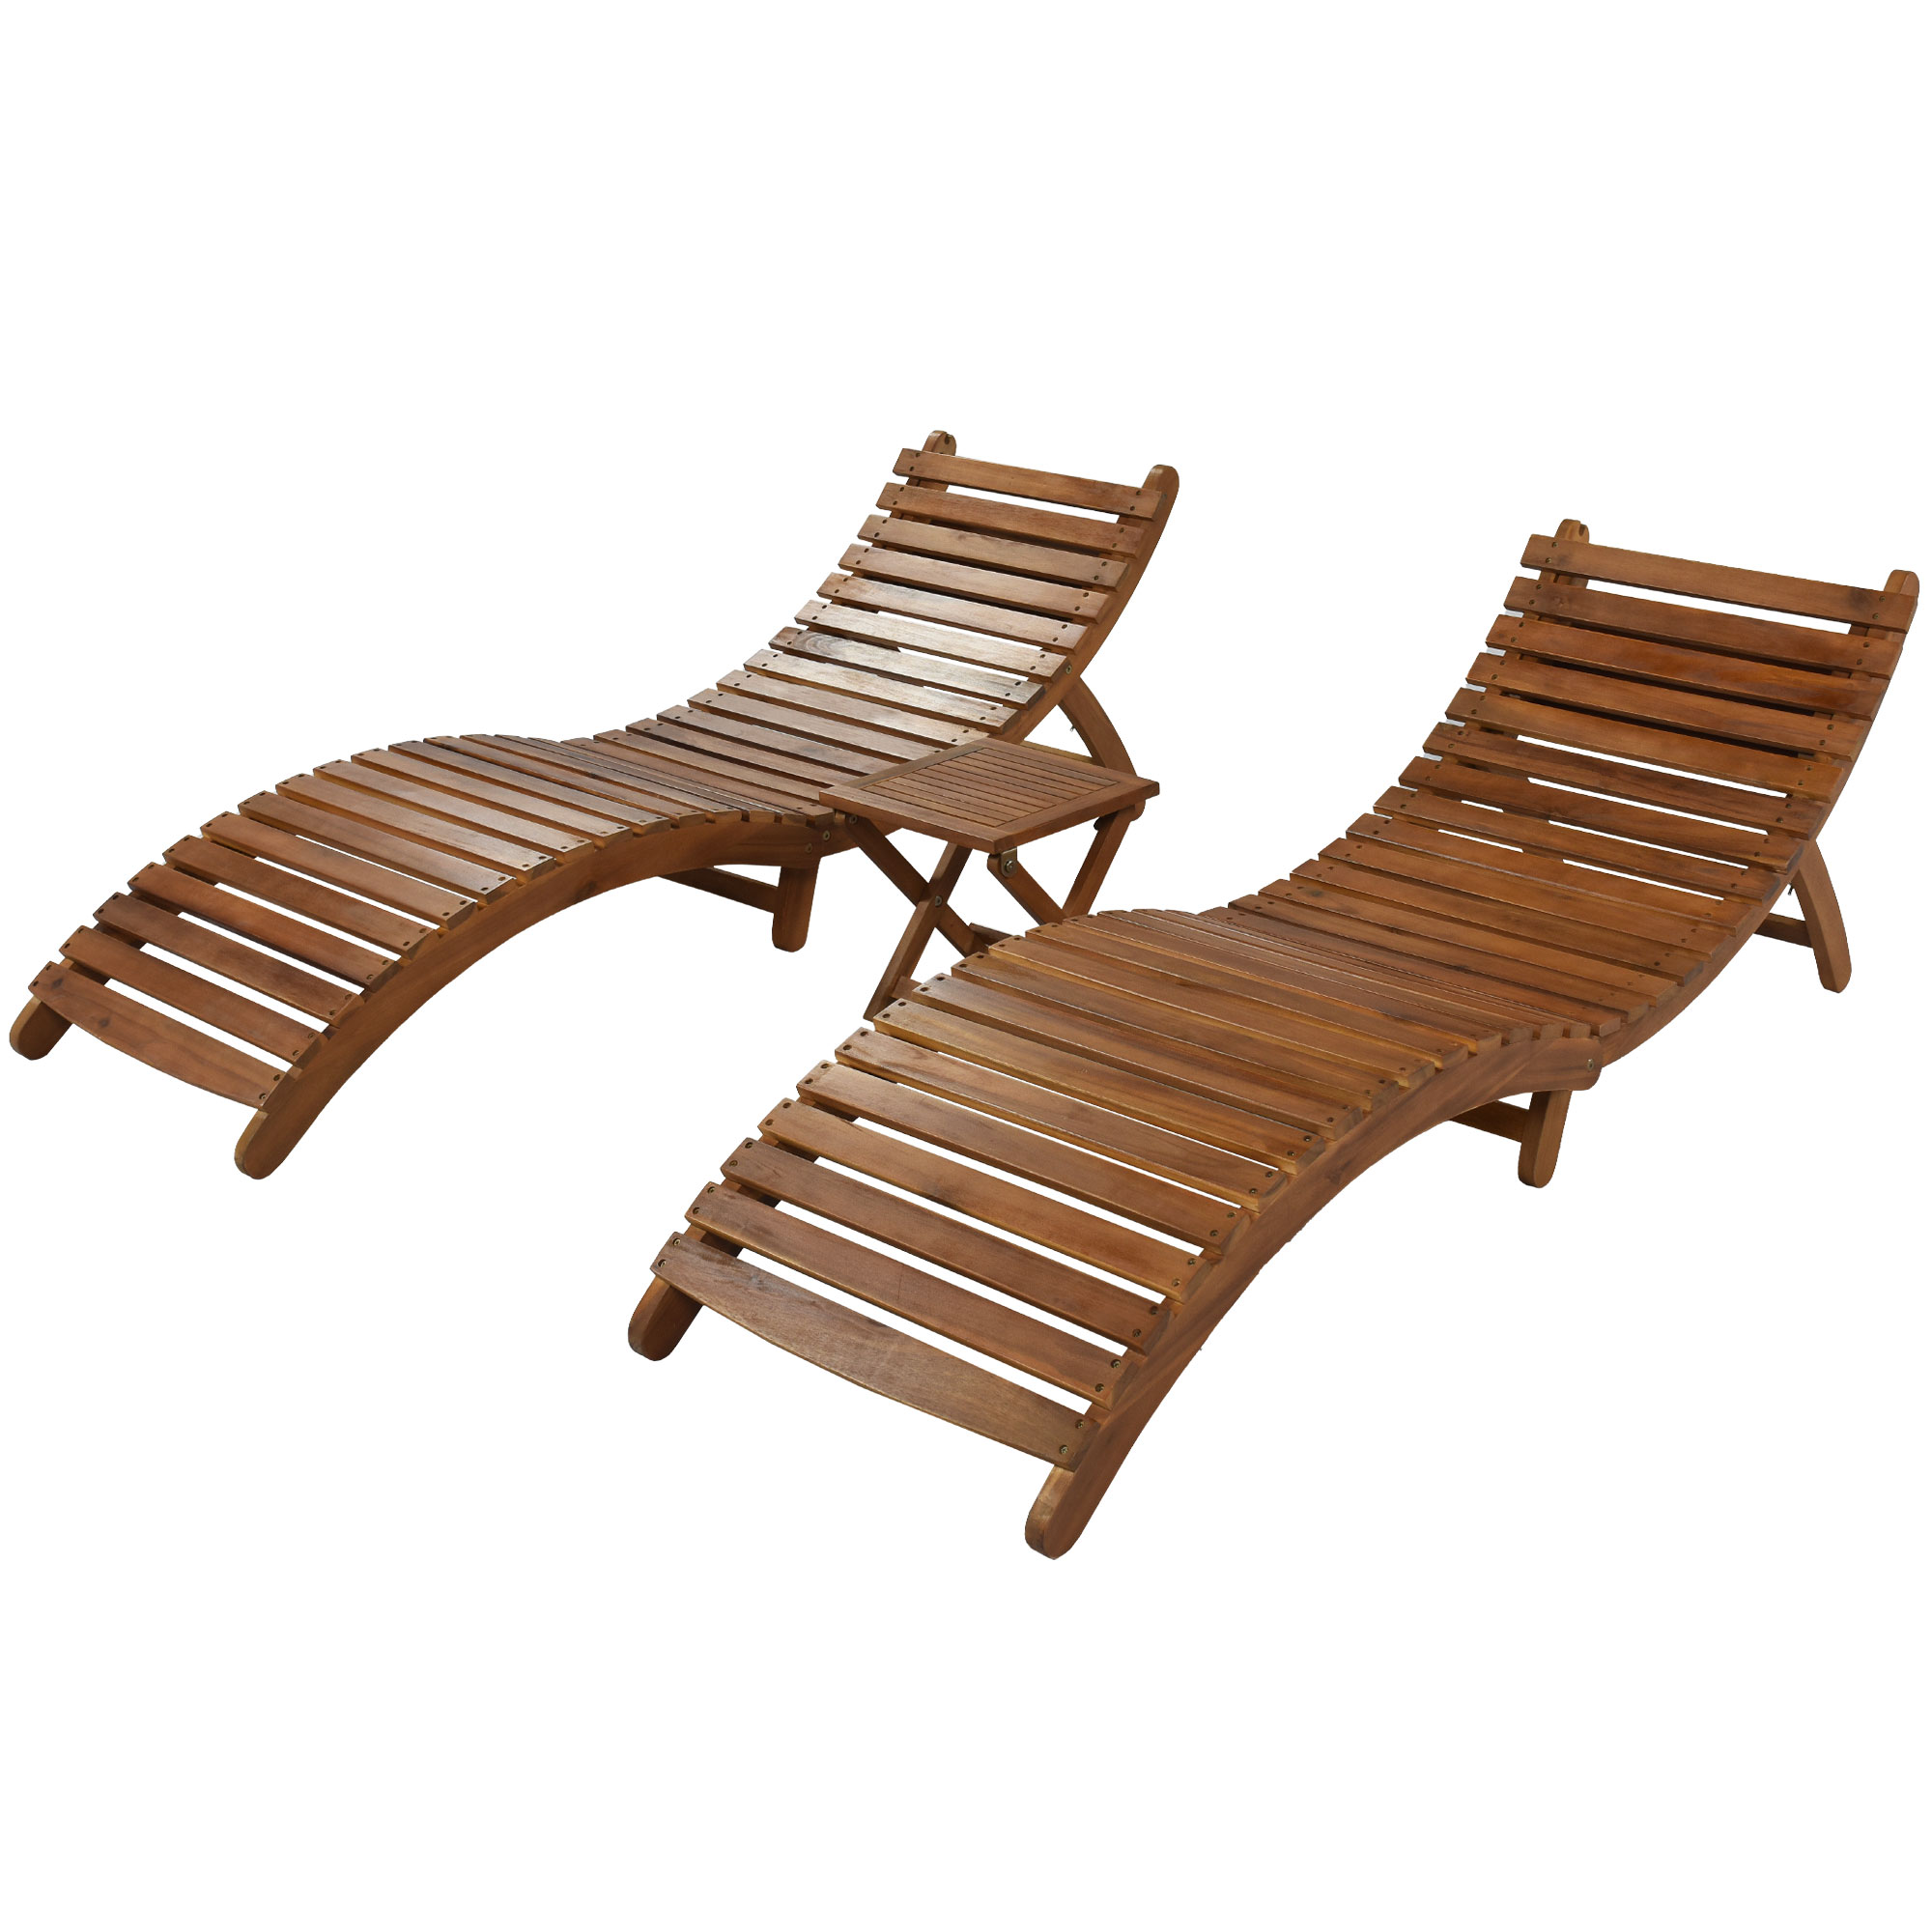 Royard Oaktree Patio Lounge Chair Set of 3 Wood Folding Chaise Lounge Set with Foldable Side Table Outdoor Portable Extended Sun Lounge Chair with Cushion for Poolside Lawn Backyard,Dark Gray - image 5 of 7